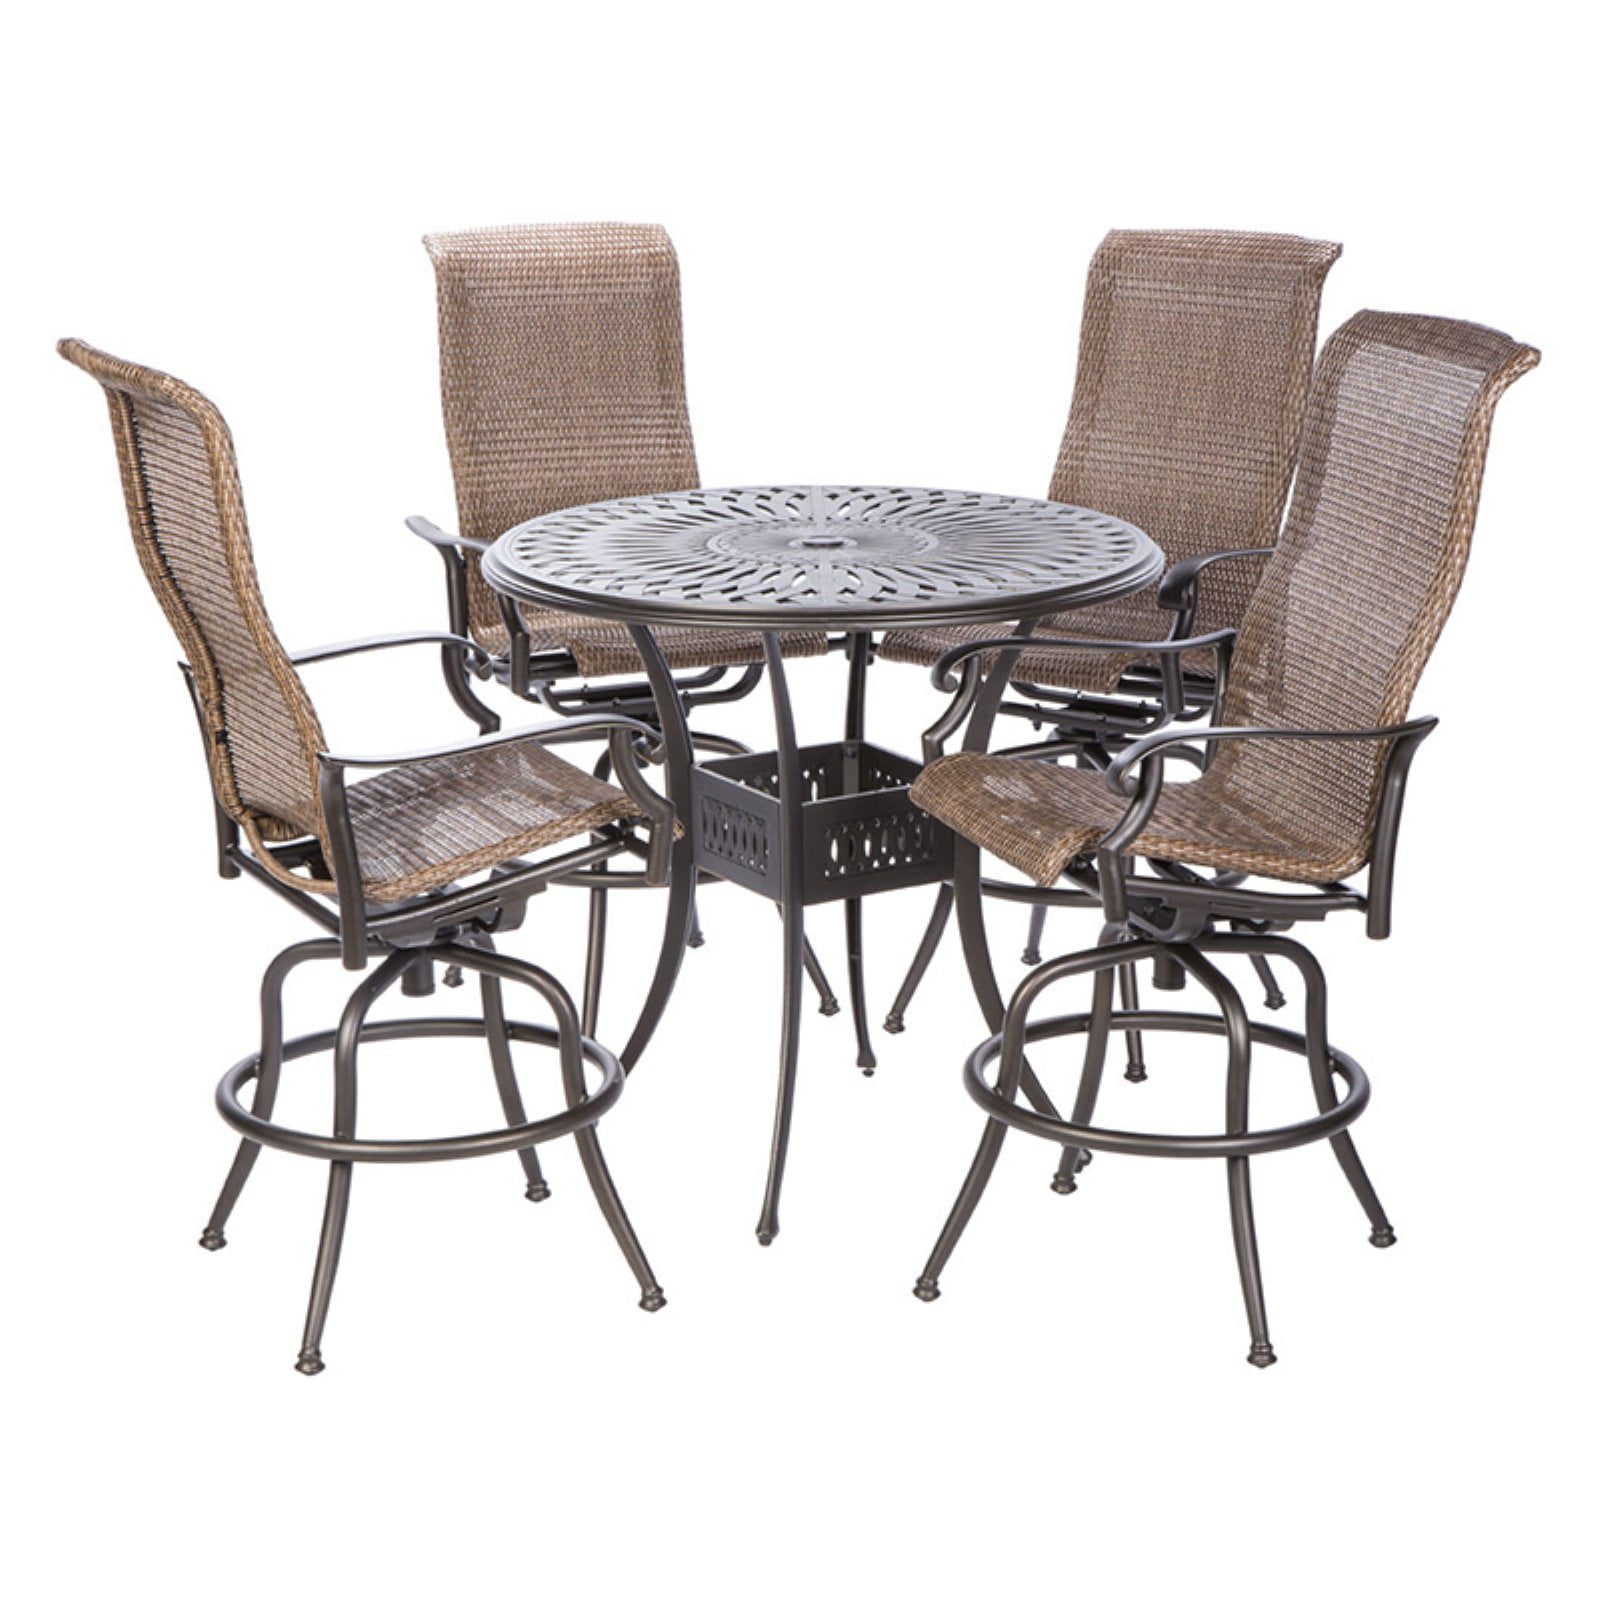 Simple Patio Set Walmart 88 for Large Space